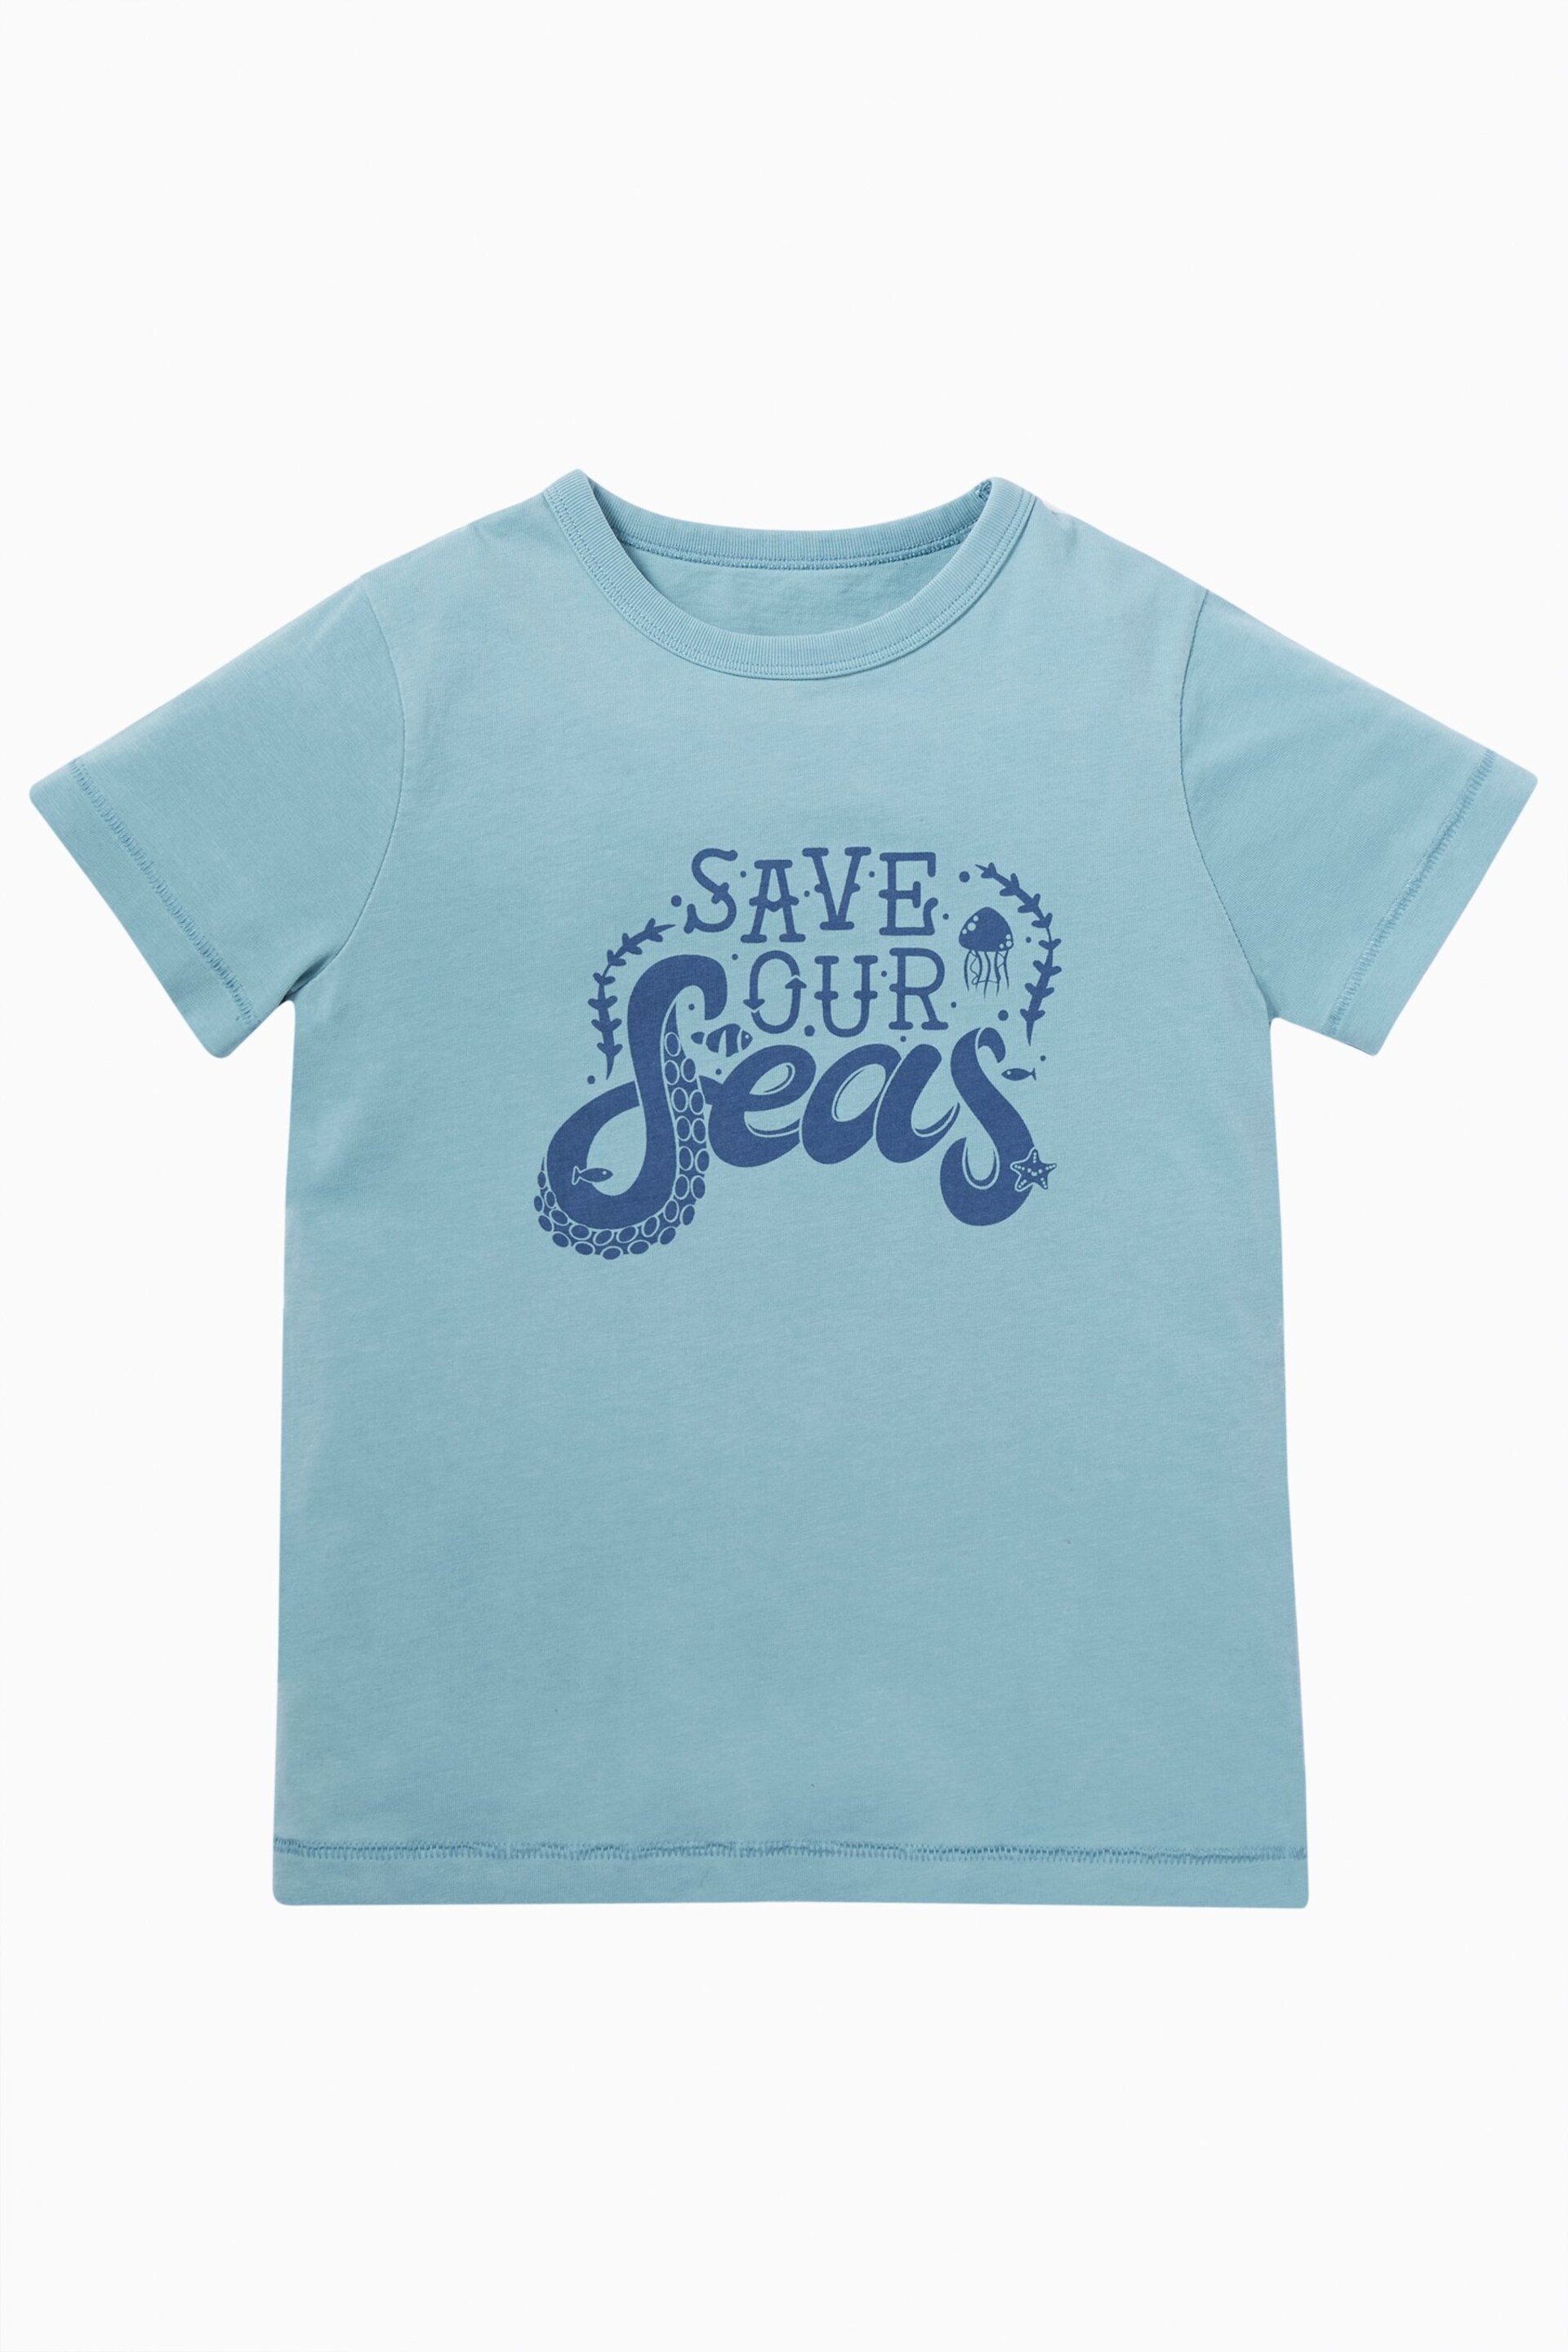 Frugi Blue Save Our Seas T-Shirt - Image 2 of 3